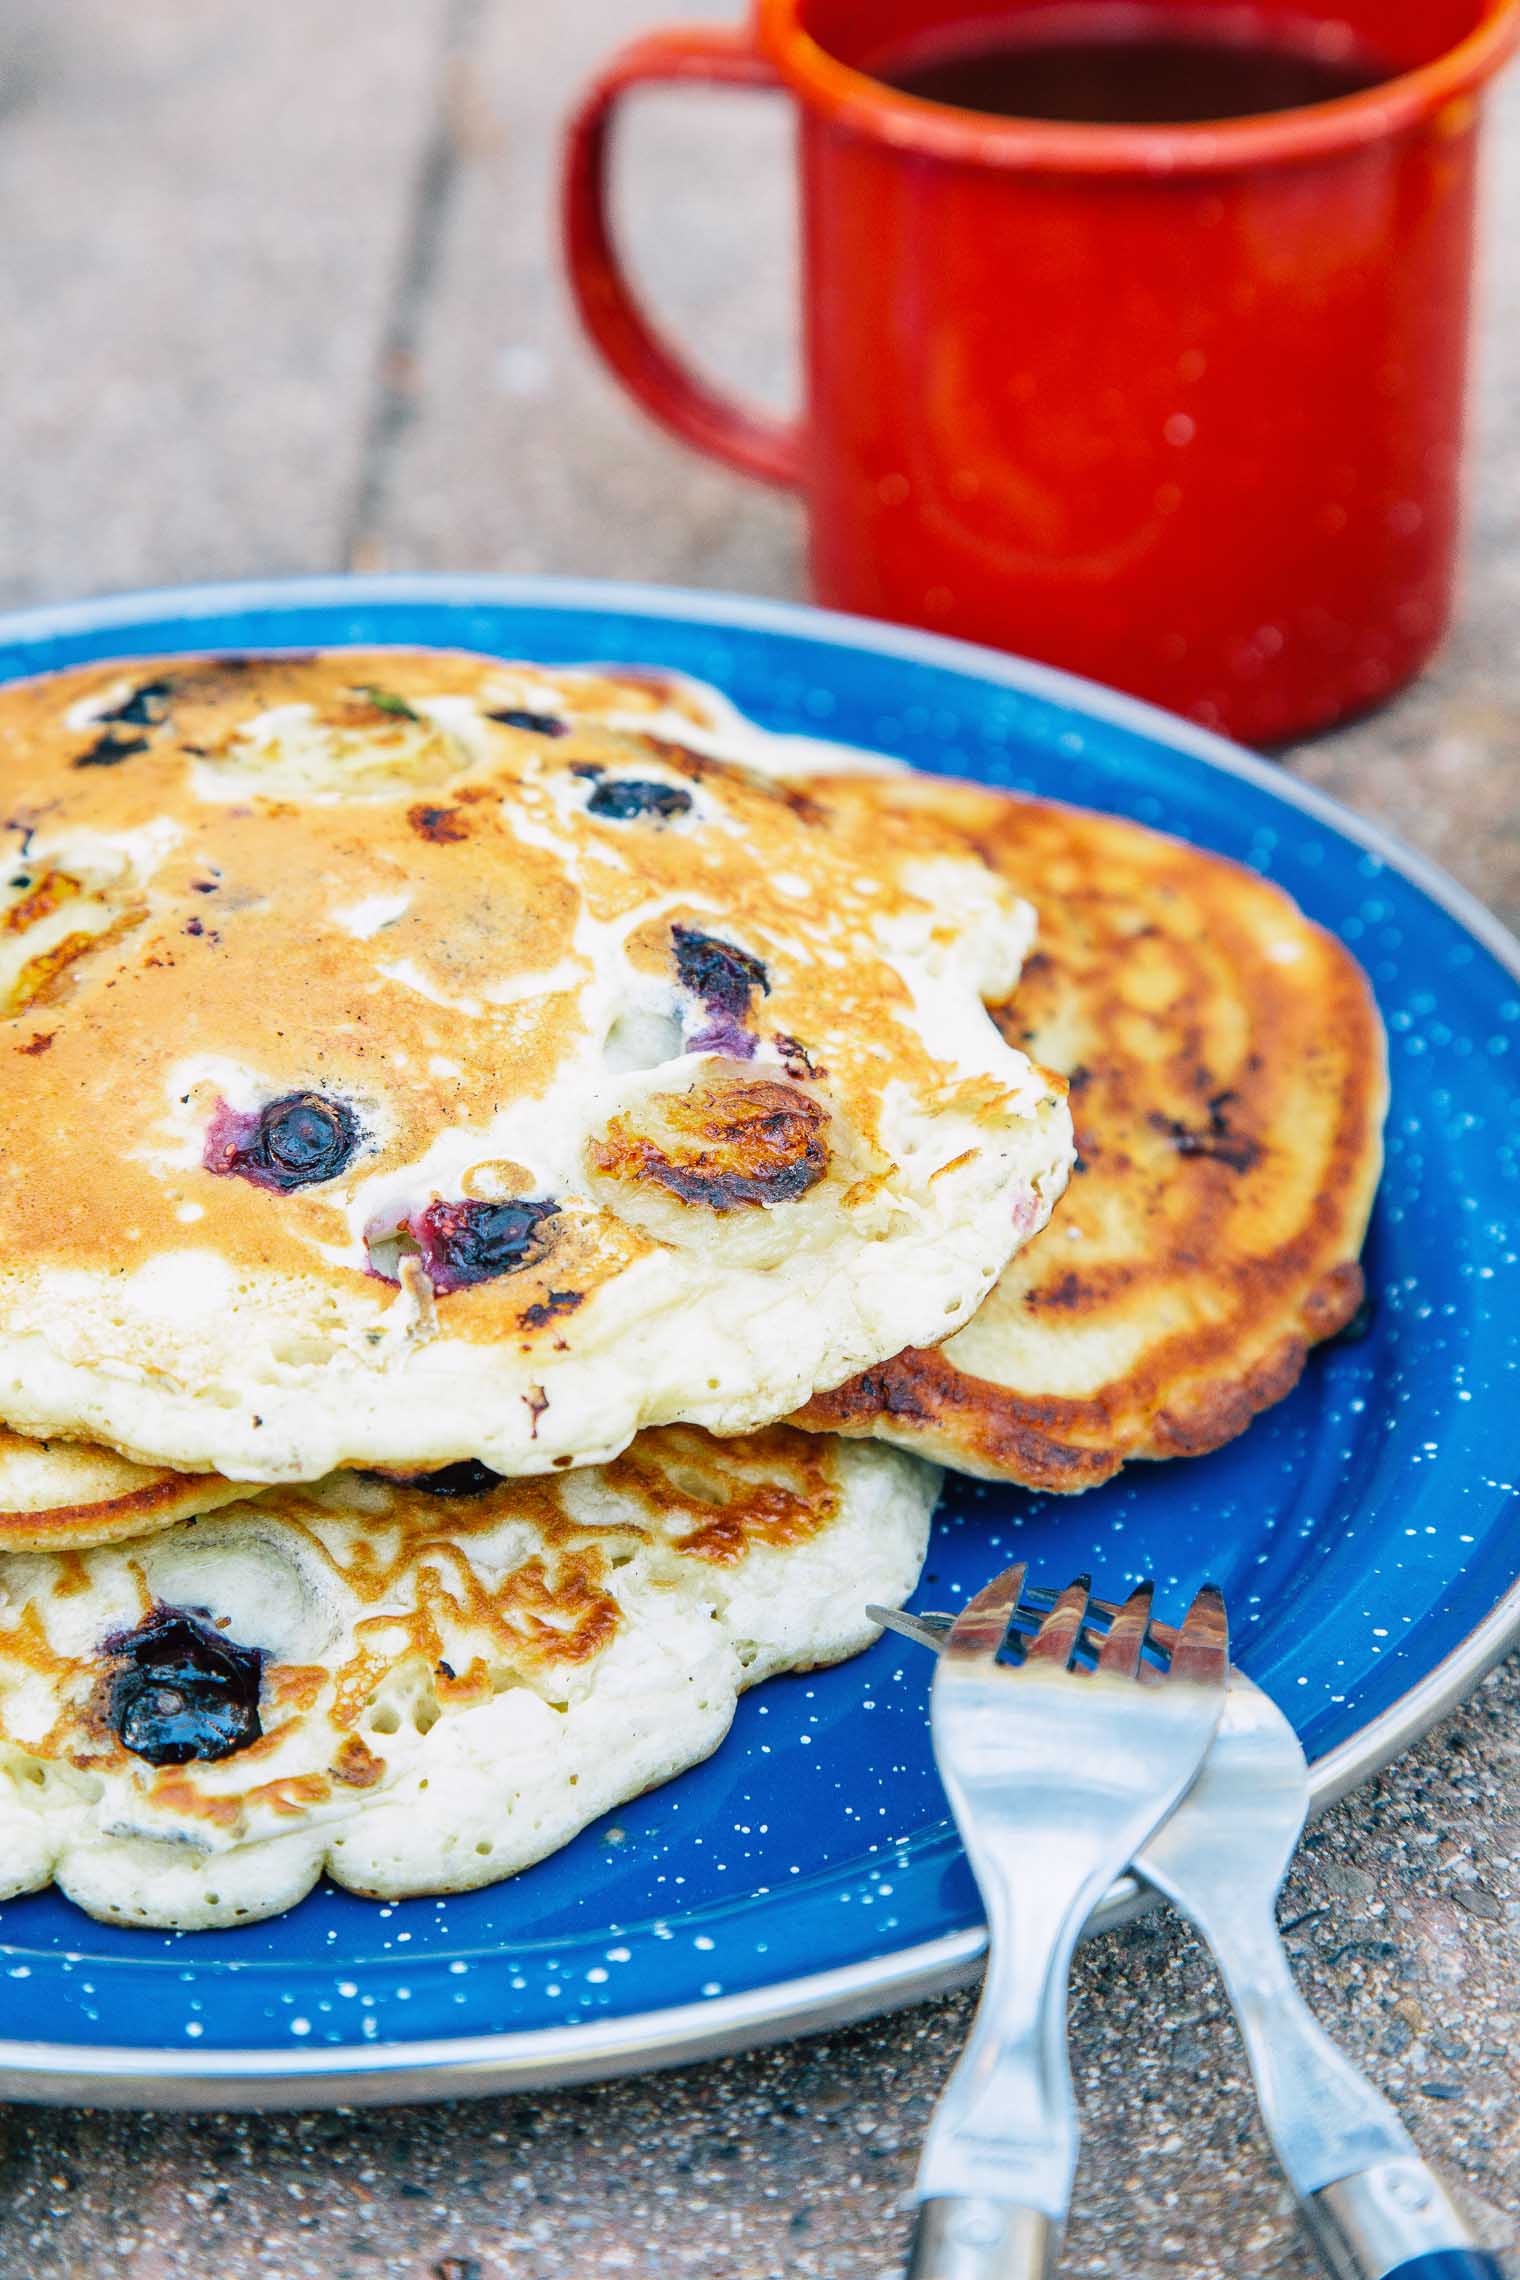 A stack of blueberry banana pancakes on a plate next to a cup of coffee